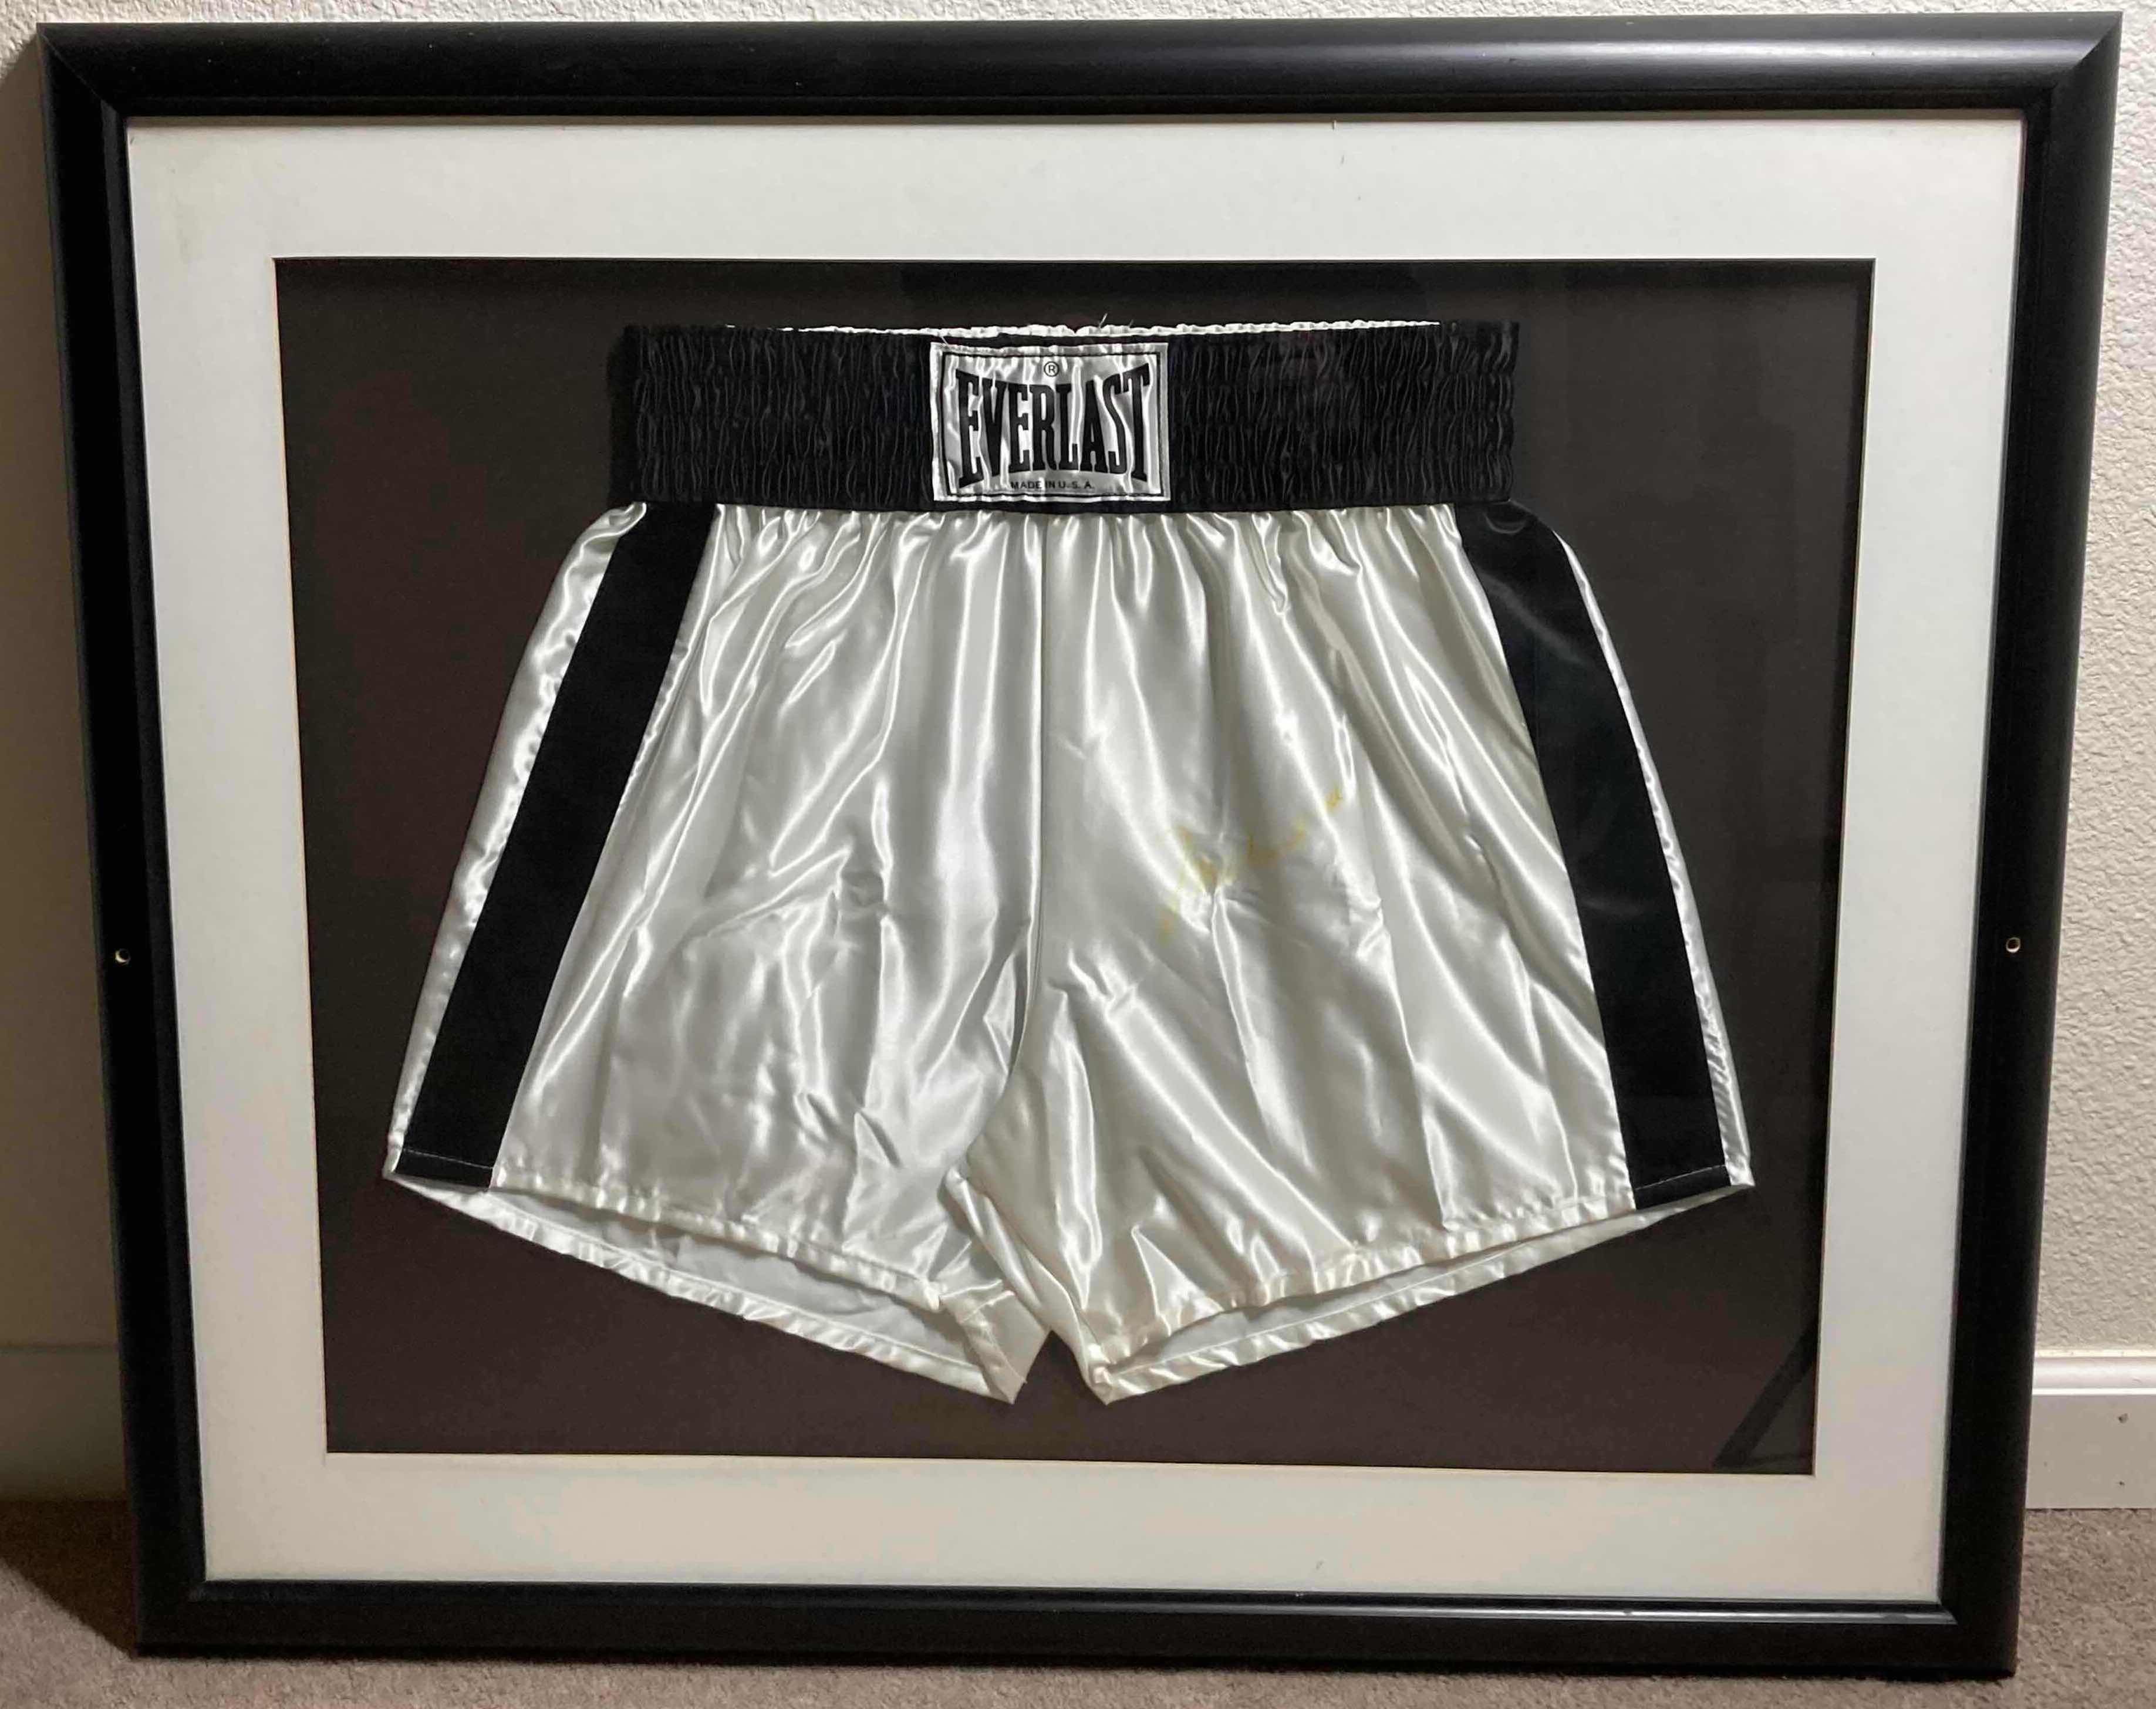 Photo 1 of MOHAMMED ALI FRAMED BOXING EVERLAST SHORTS AUTOGRAPHED BY MOHAMMED ALI NO COA 35” X 29.5”